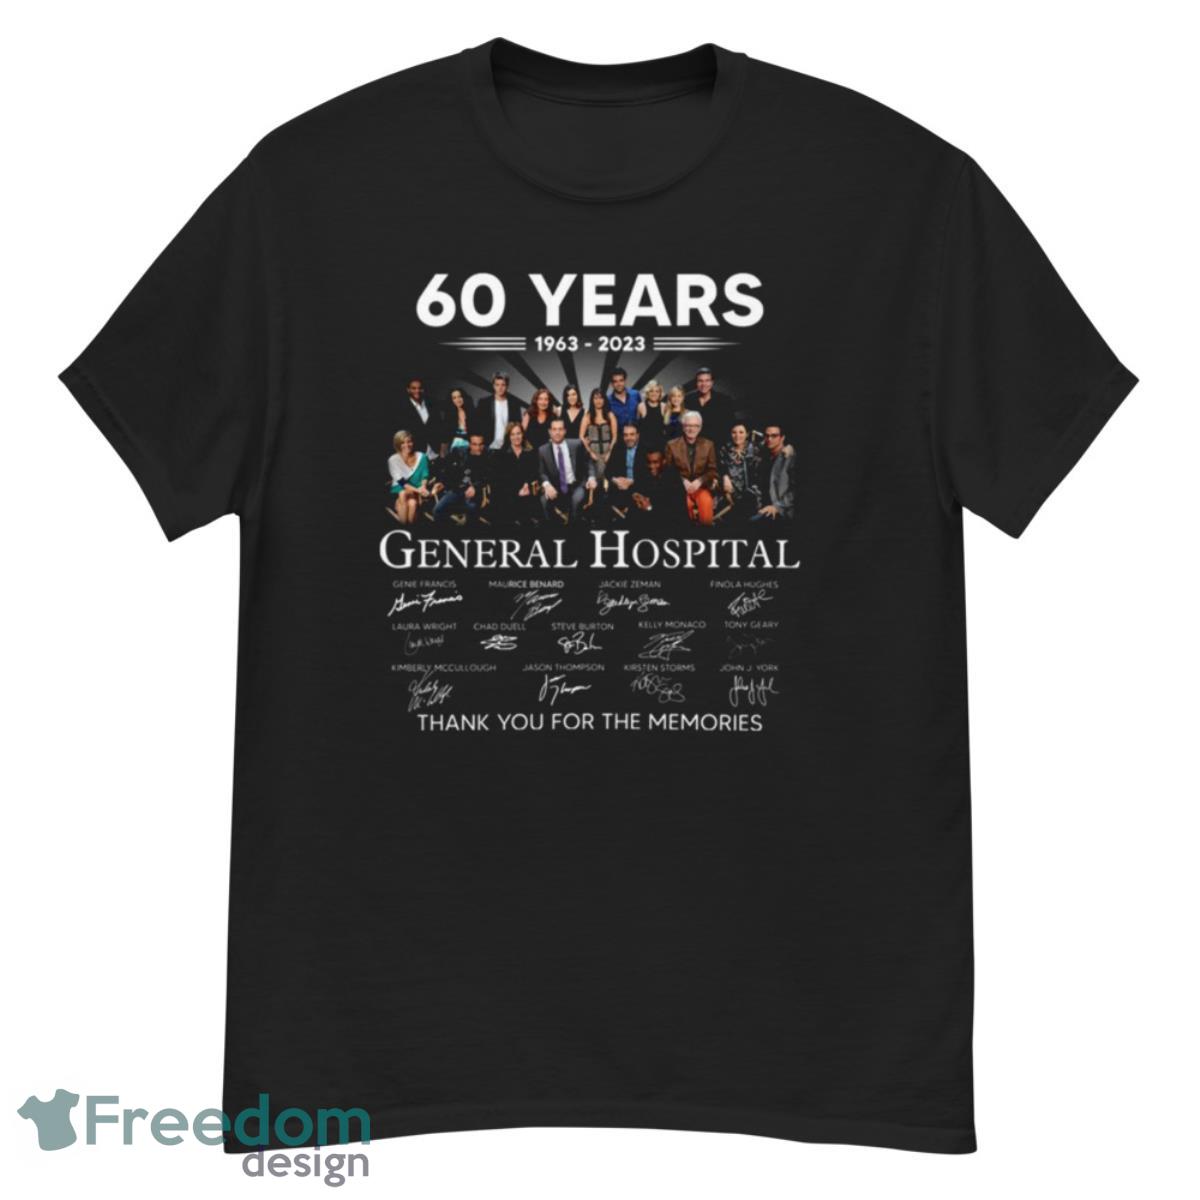 60 years 1963 2023 general hospital thank you for the memories shirt - G500 Men’s Classic T-Shirt